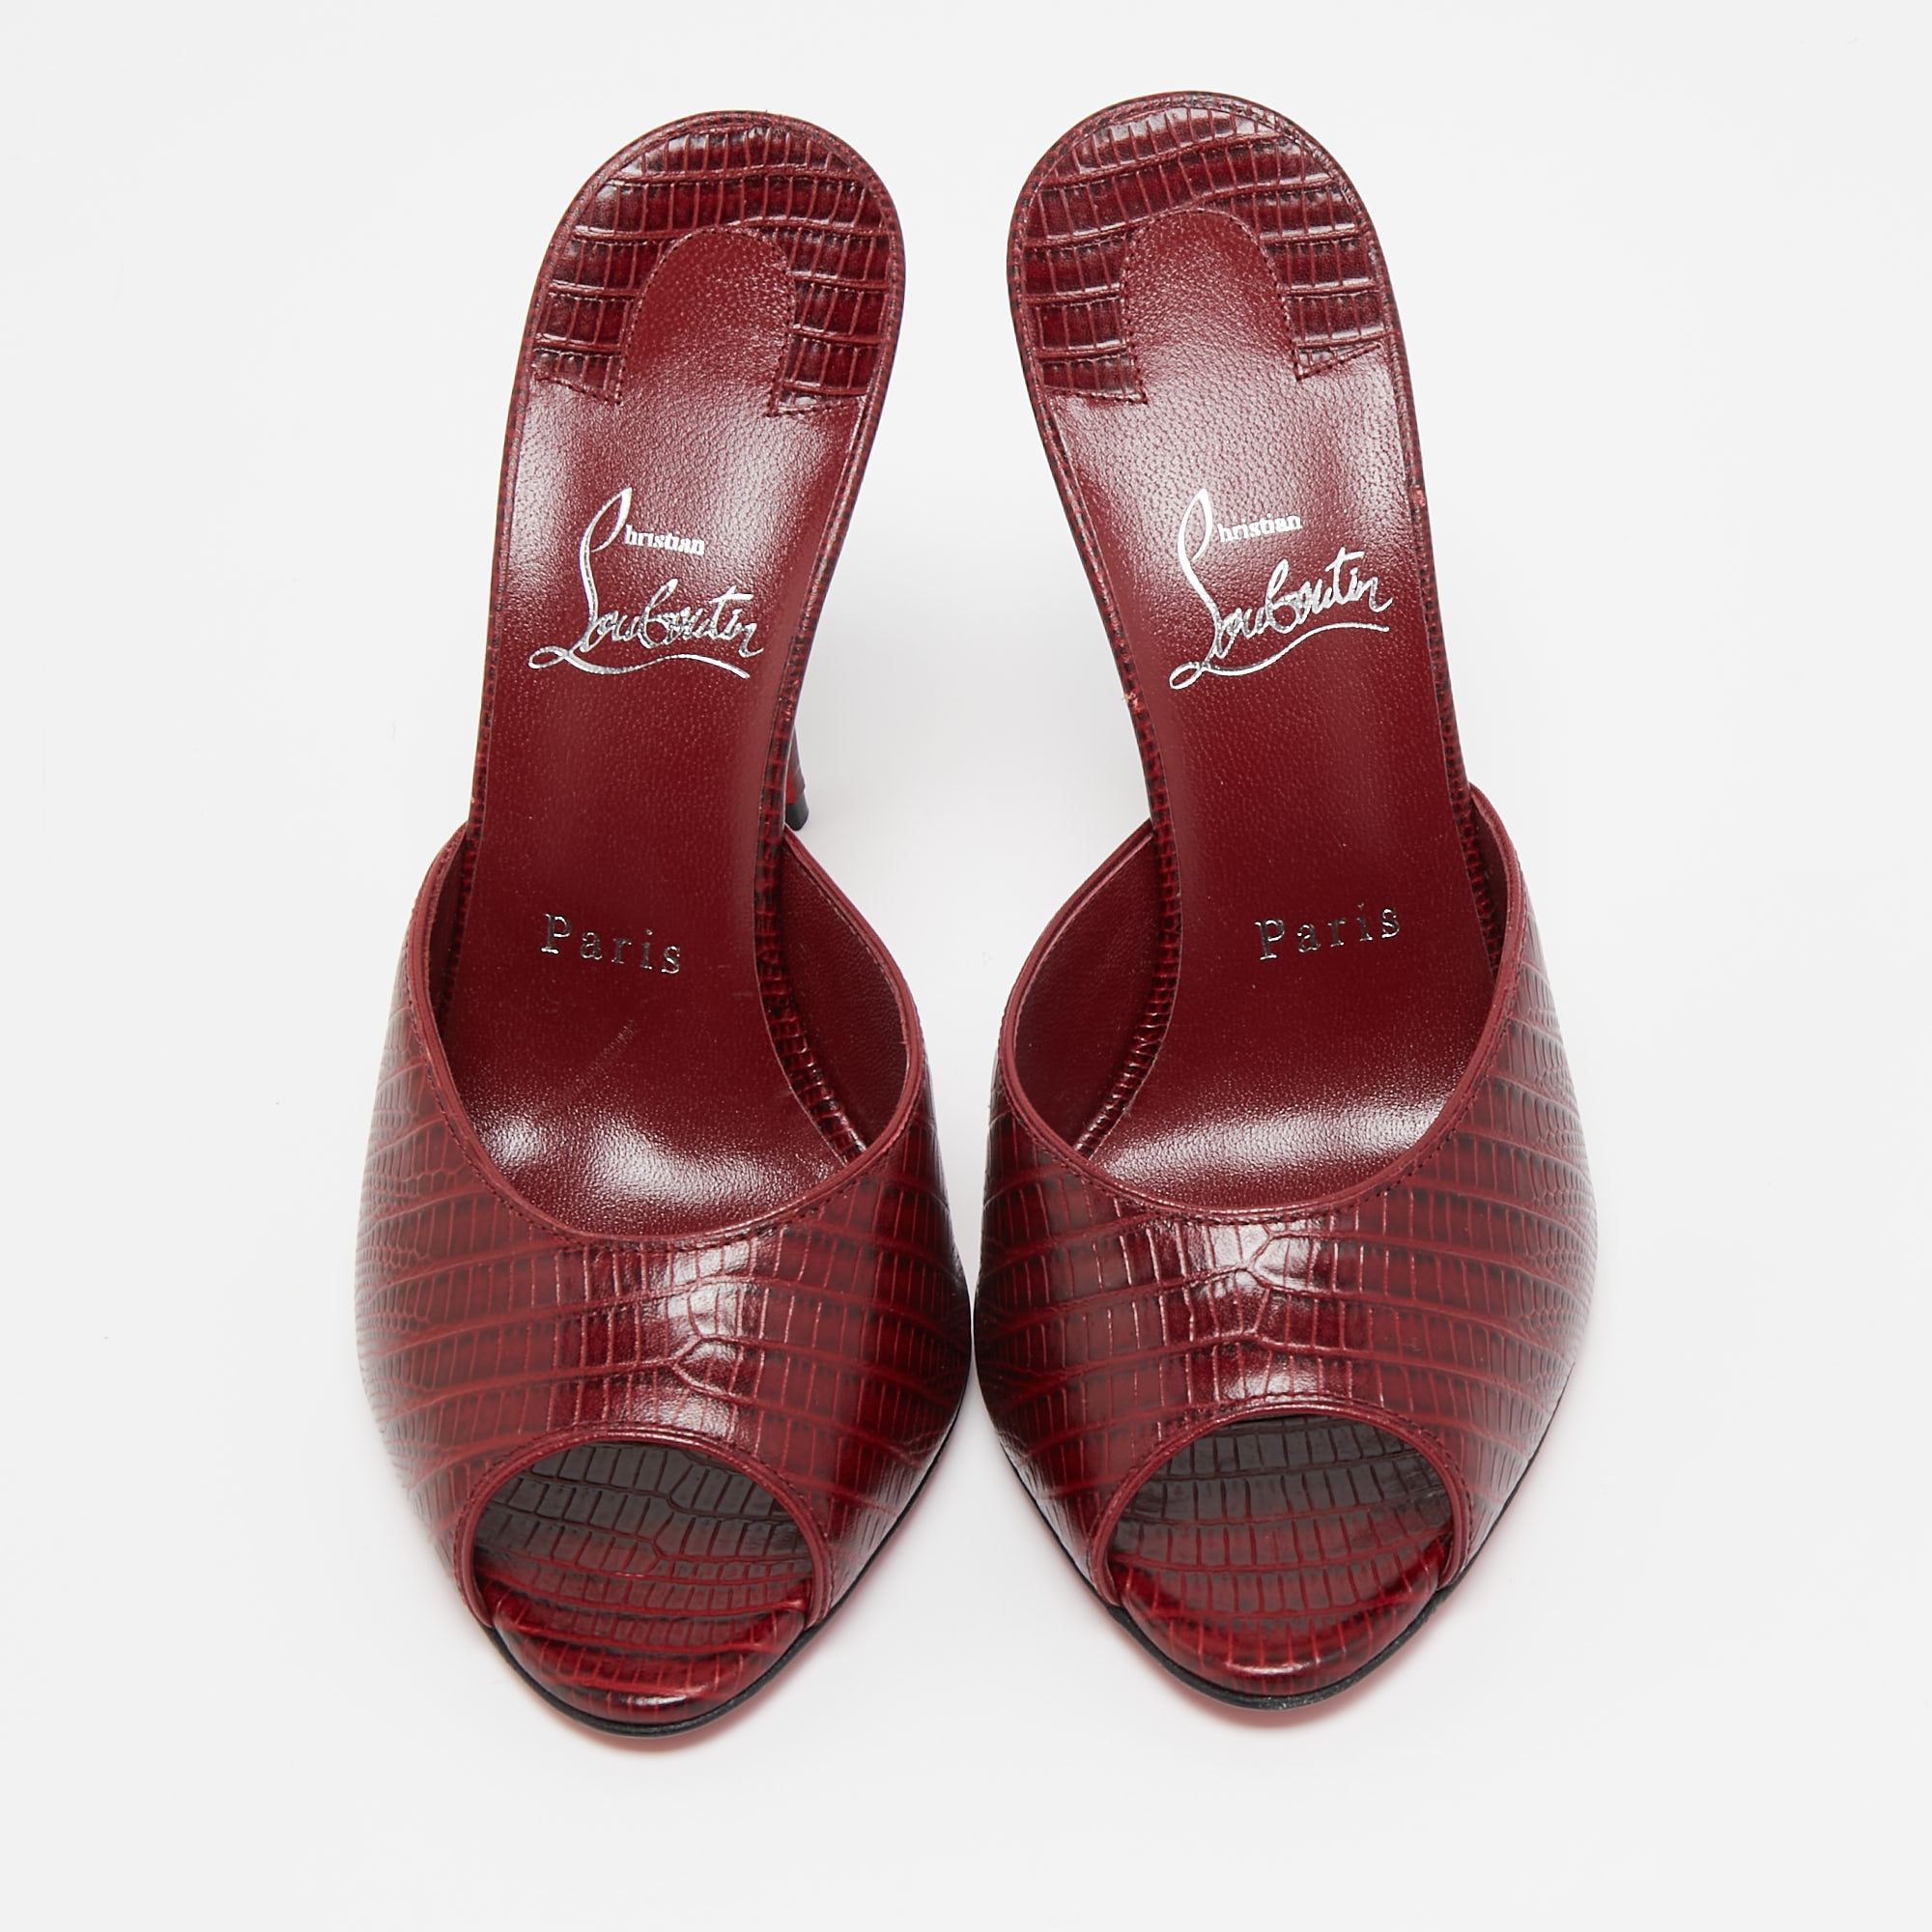 Christian Louboutin Burgundy Lizard Embossed Leather Me Dolly Slide Sandals Size 38.5